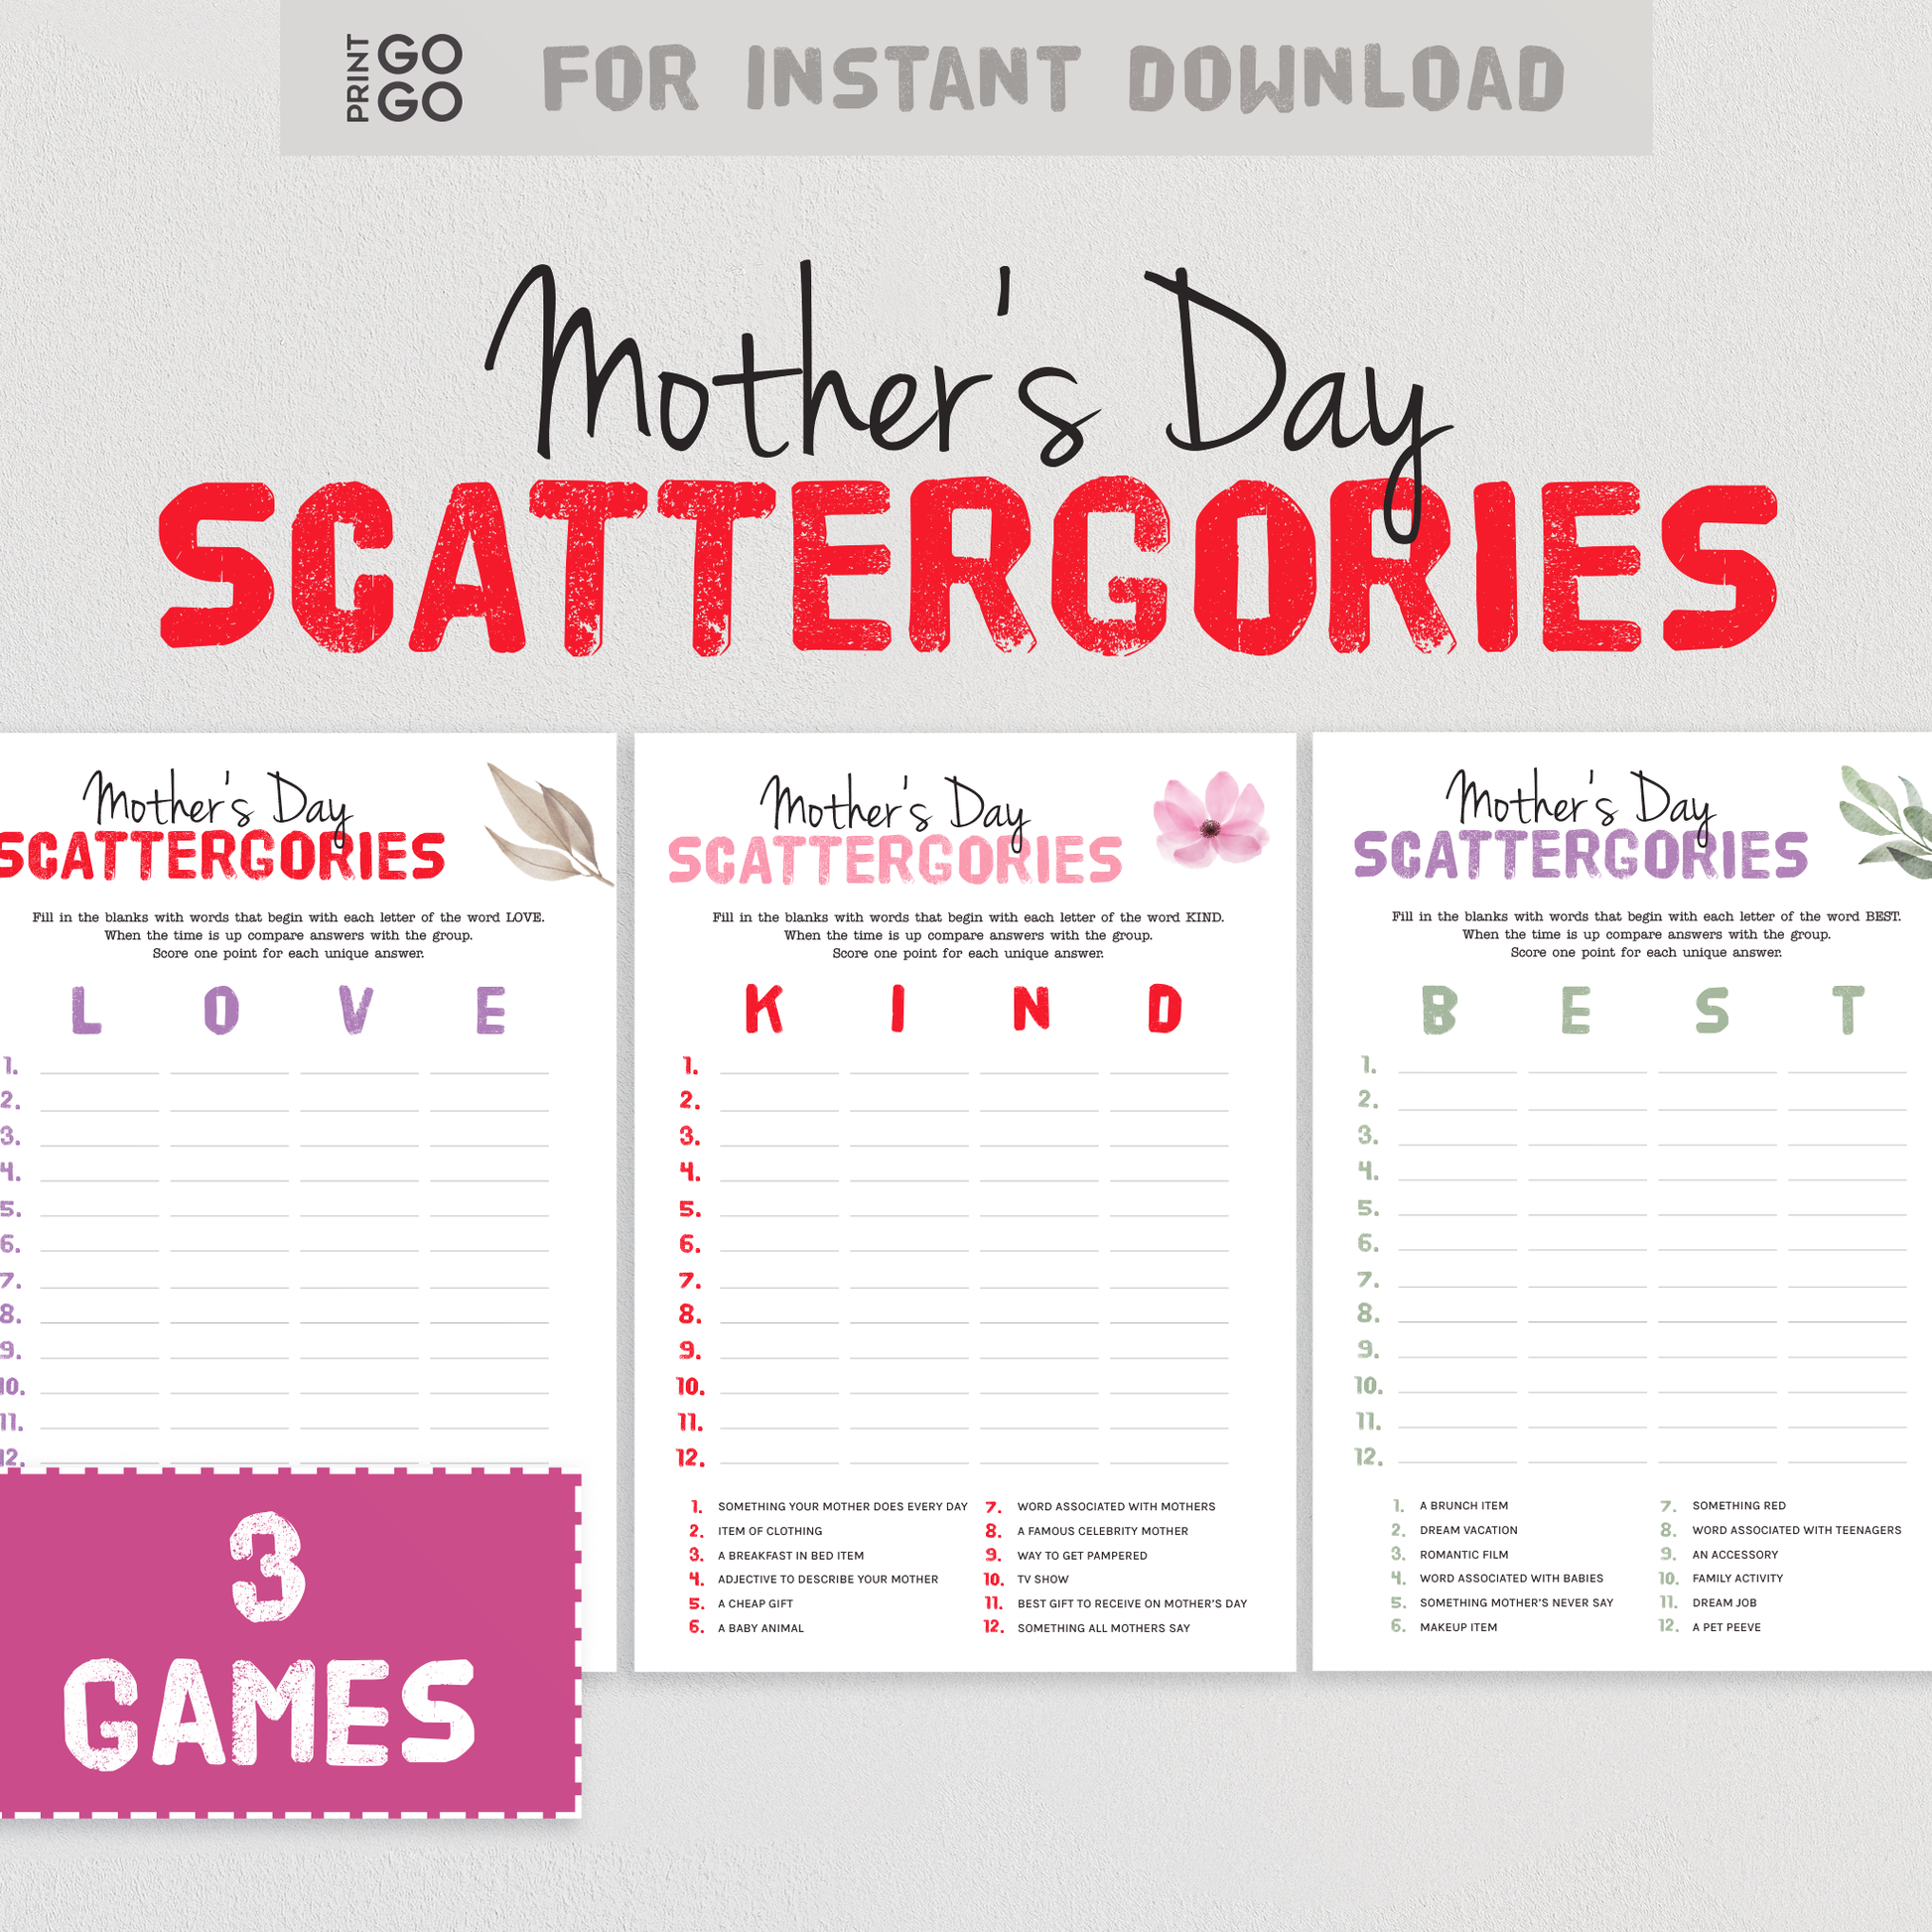 Mother's Day Scattergories - The Fun Game Of Guessing Unique Answers!